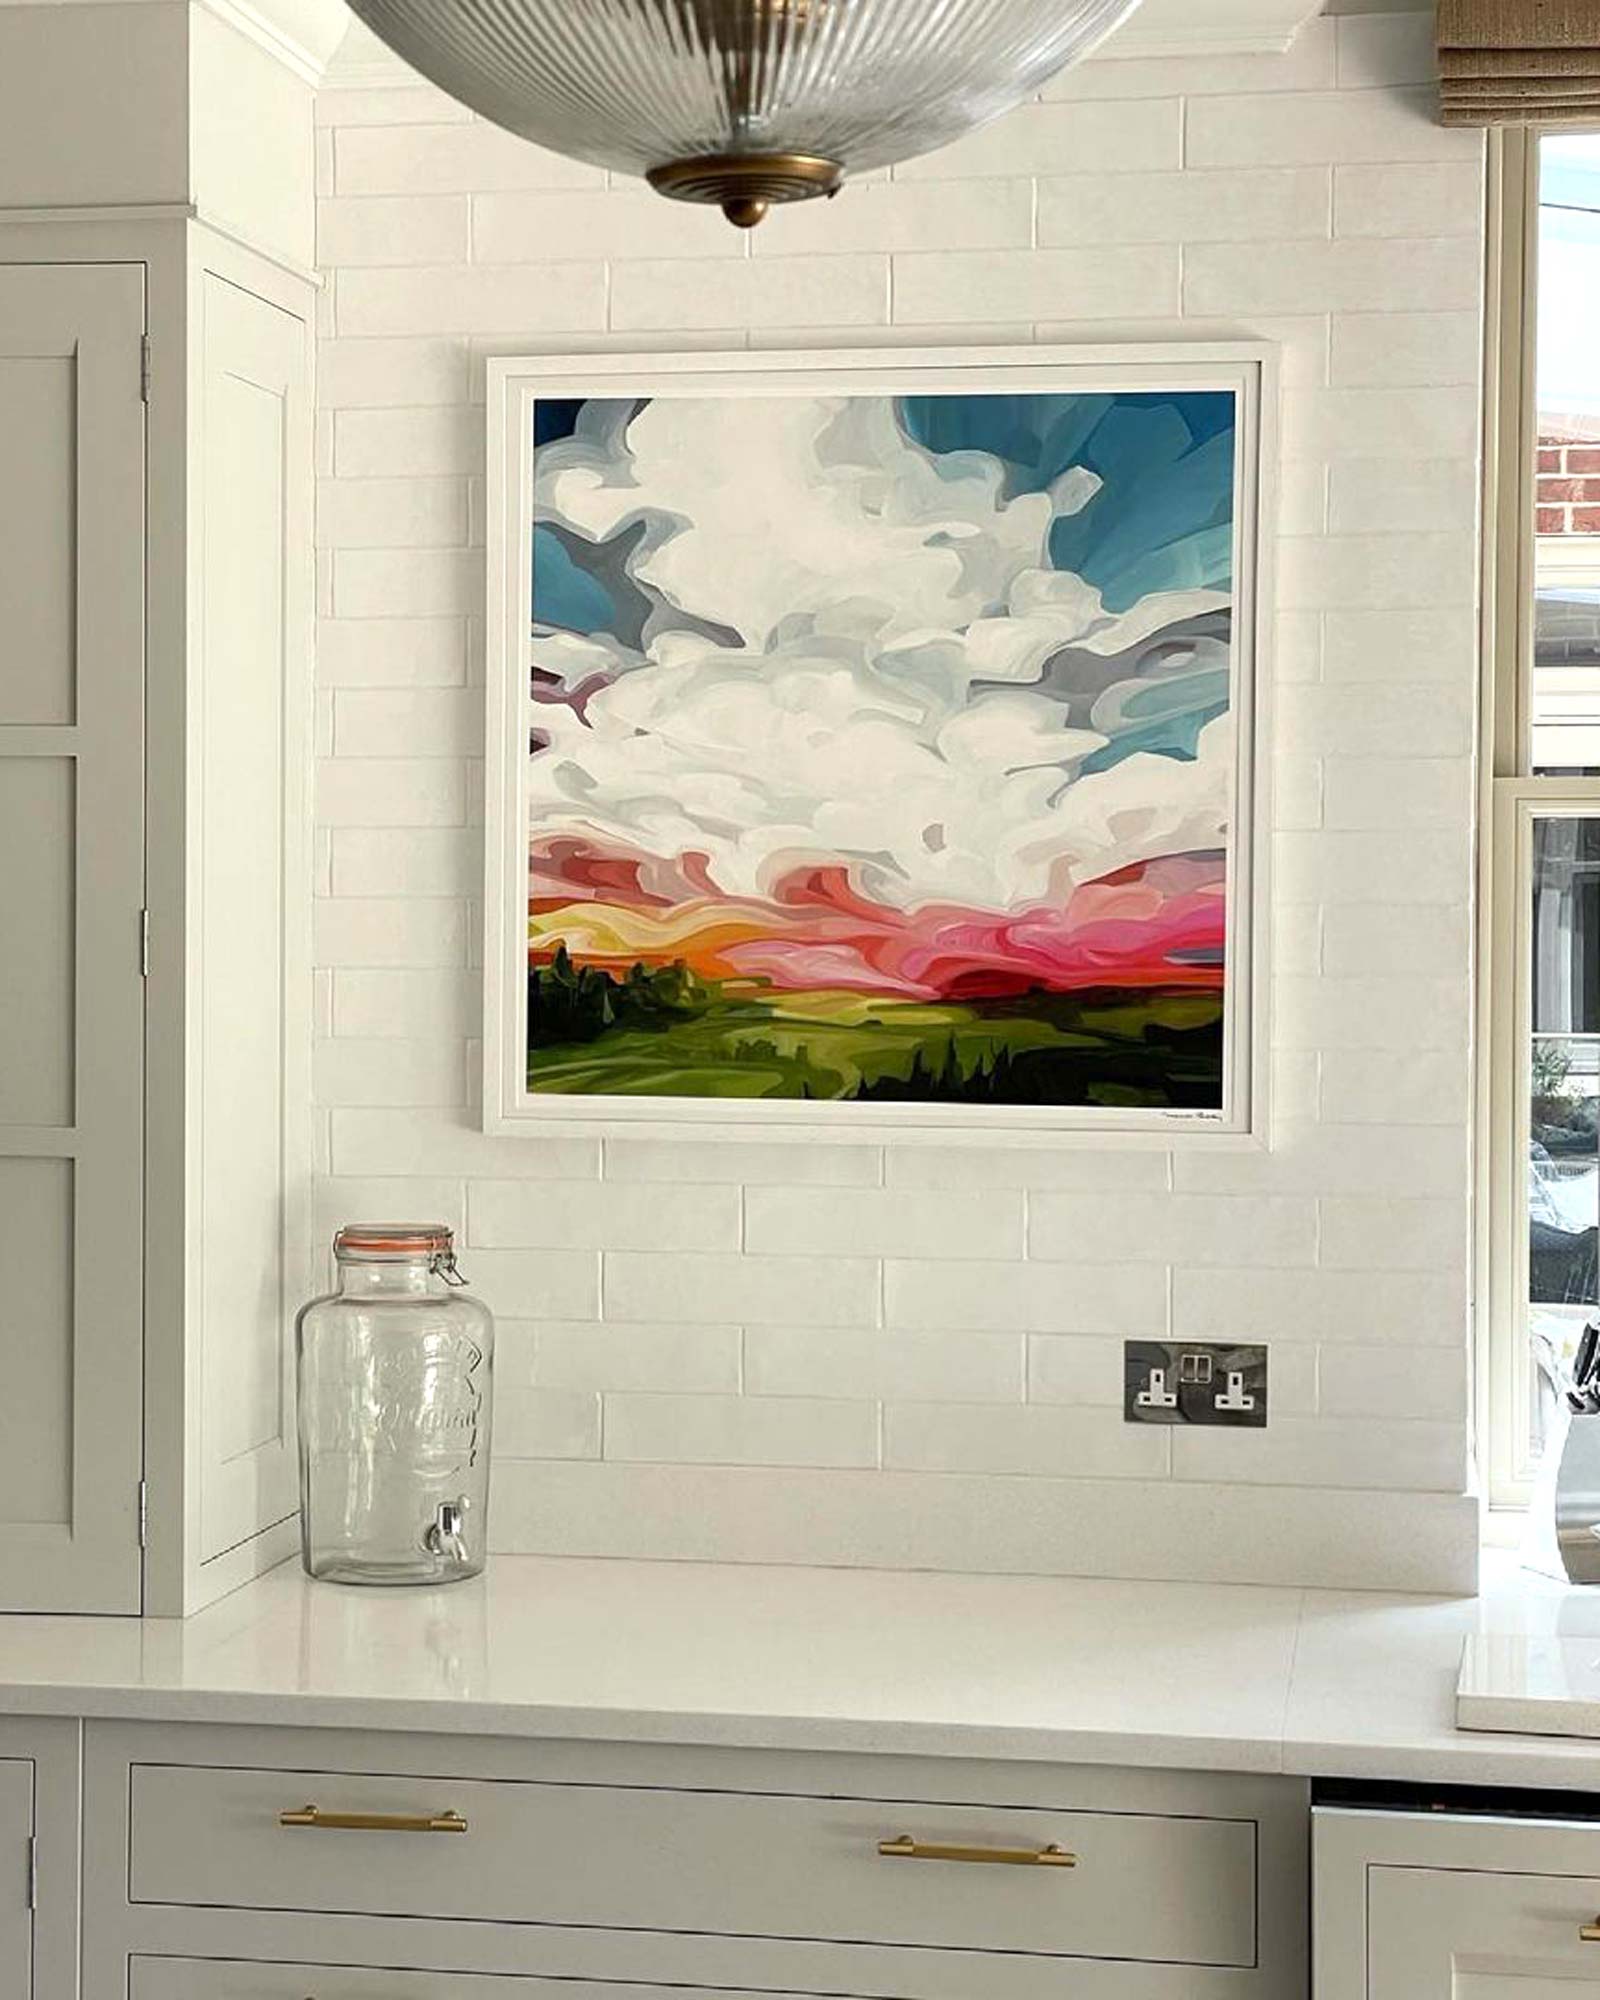 acrylic sky painting art print in kitchen